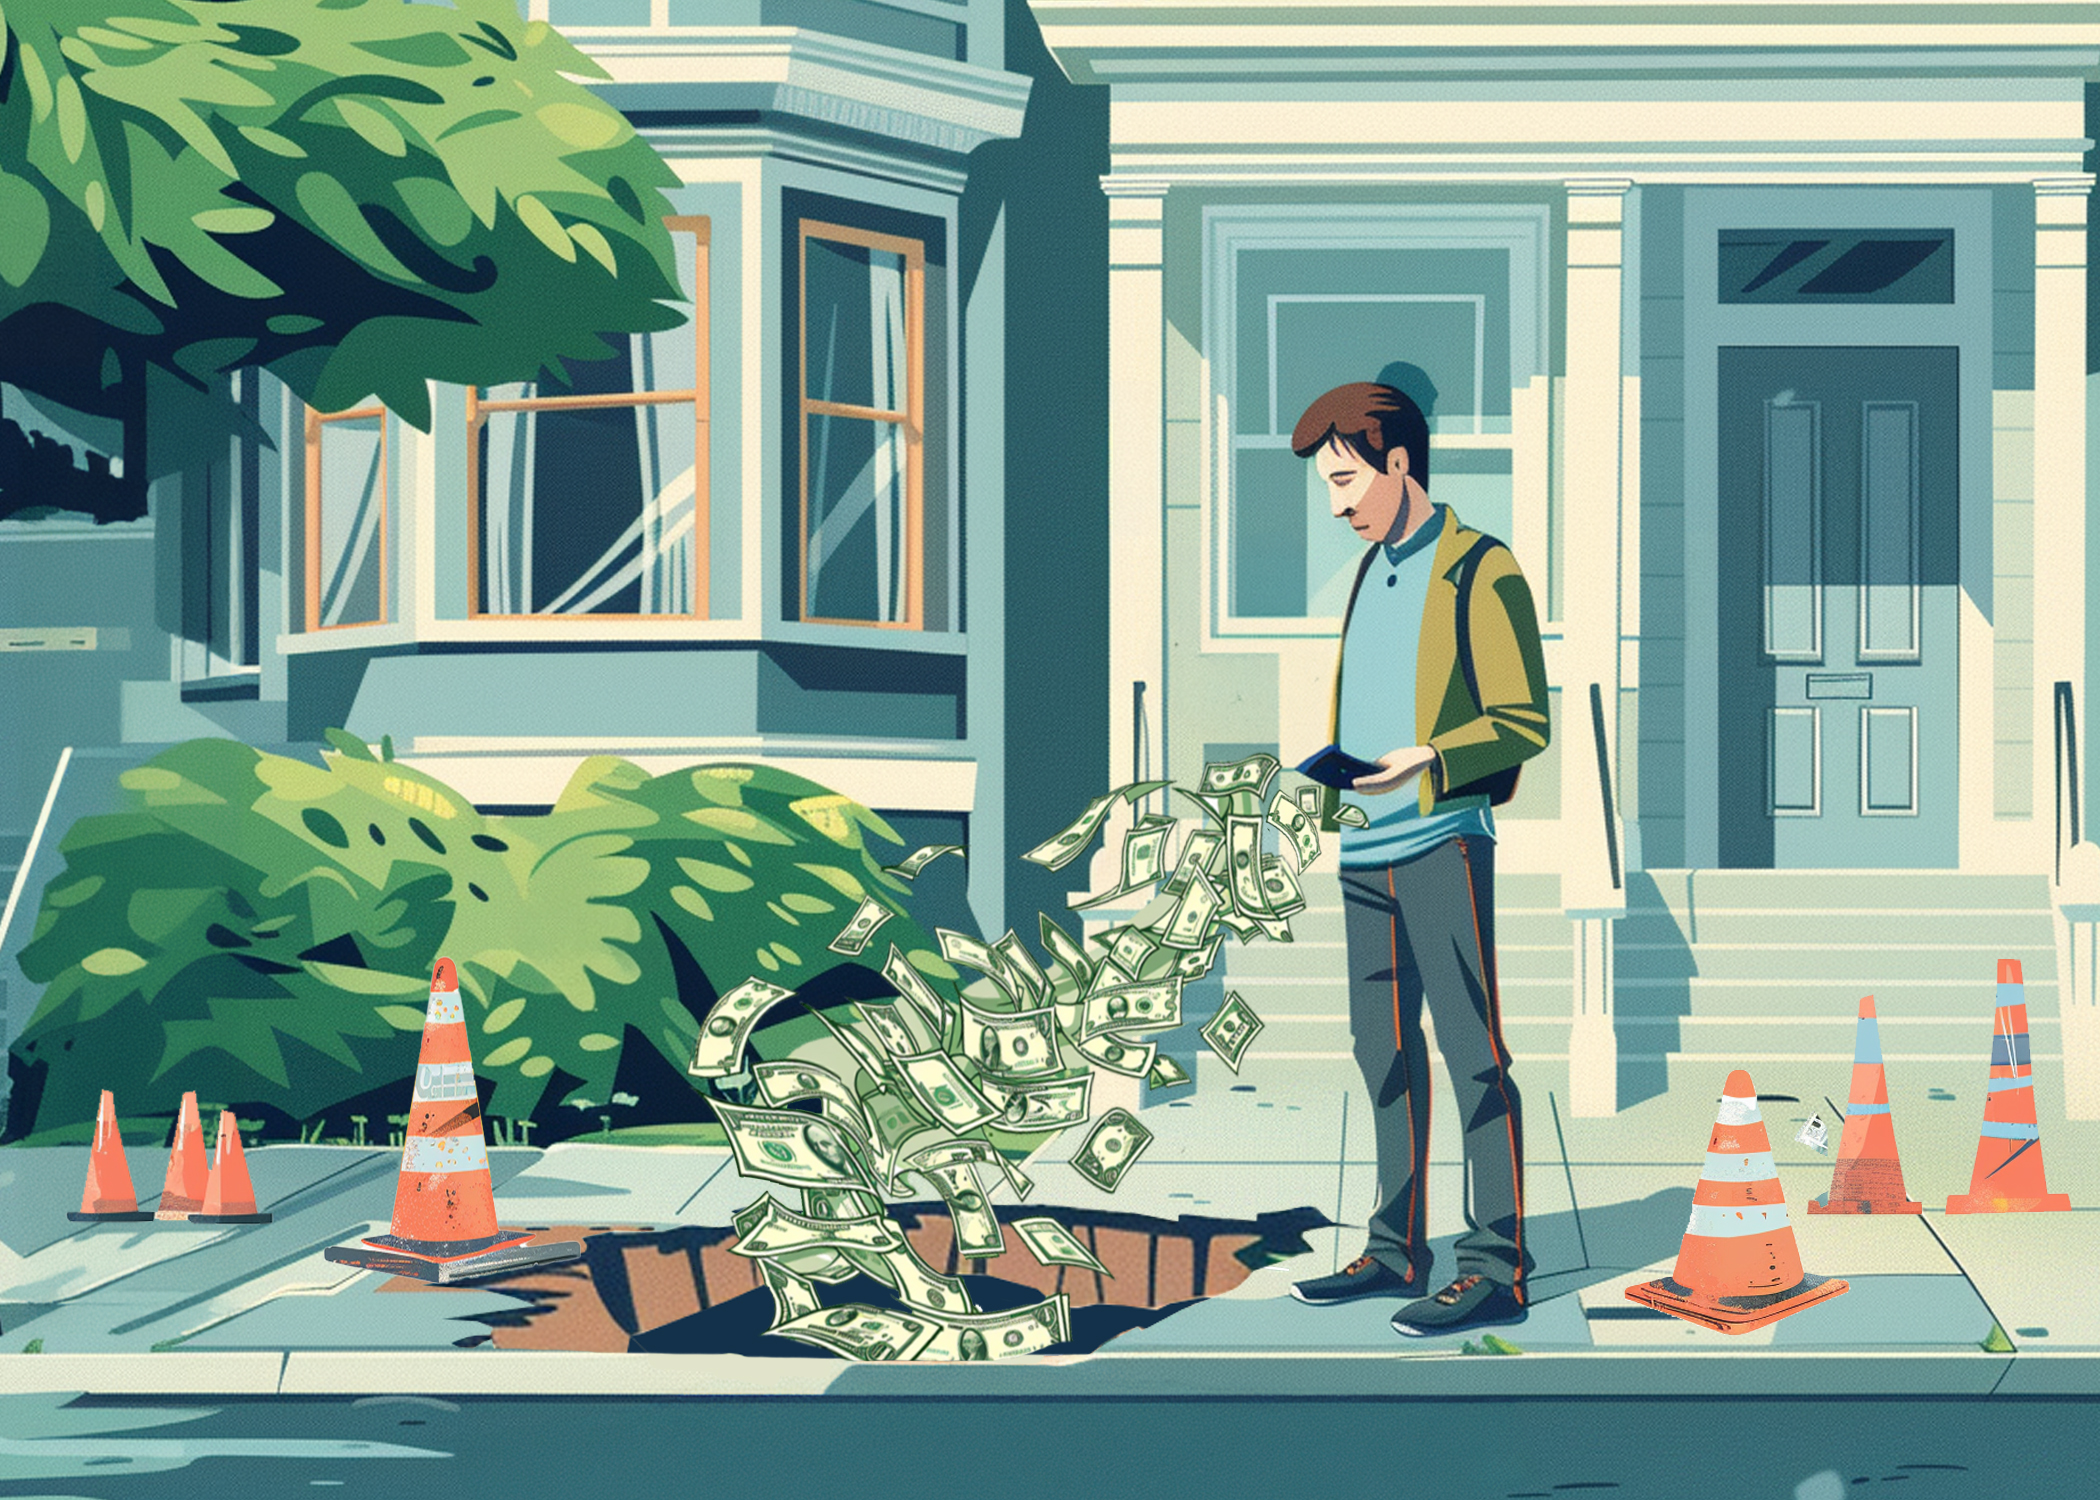 An illustration shows a man standing next to a hole in the sidewalk with a pile of money falling into the hole.